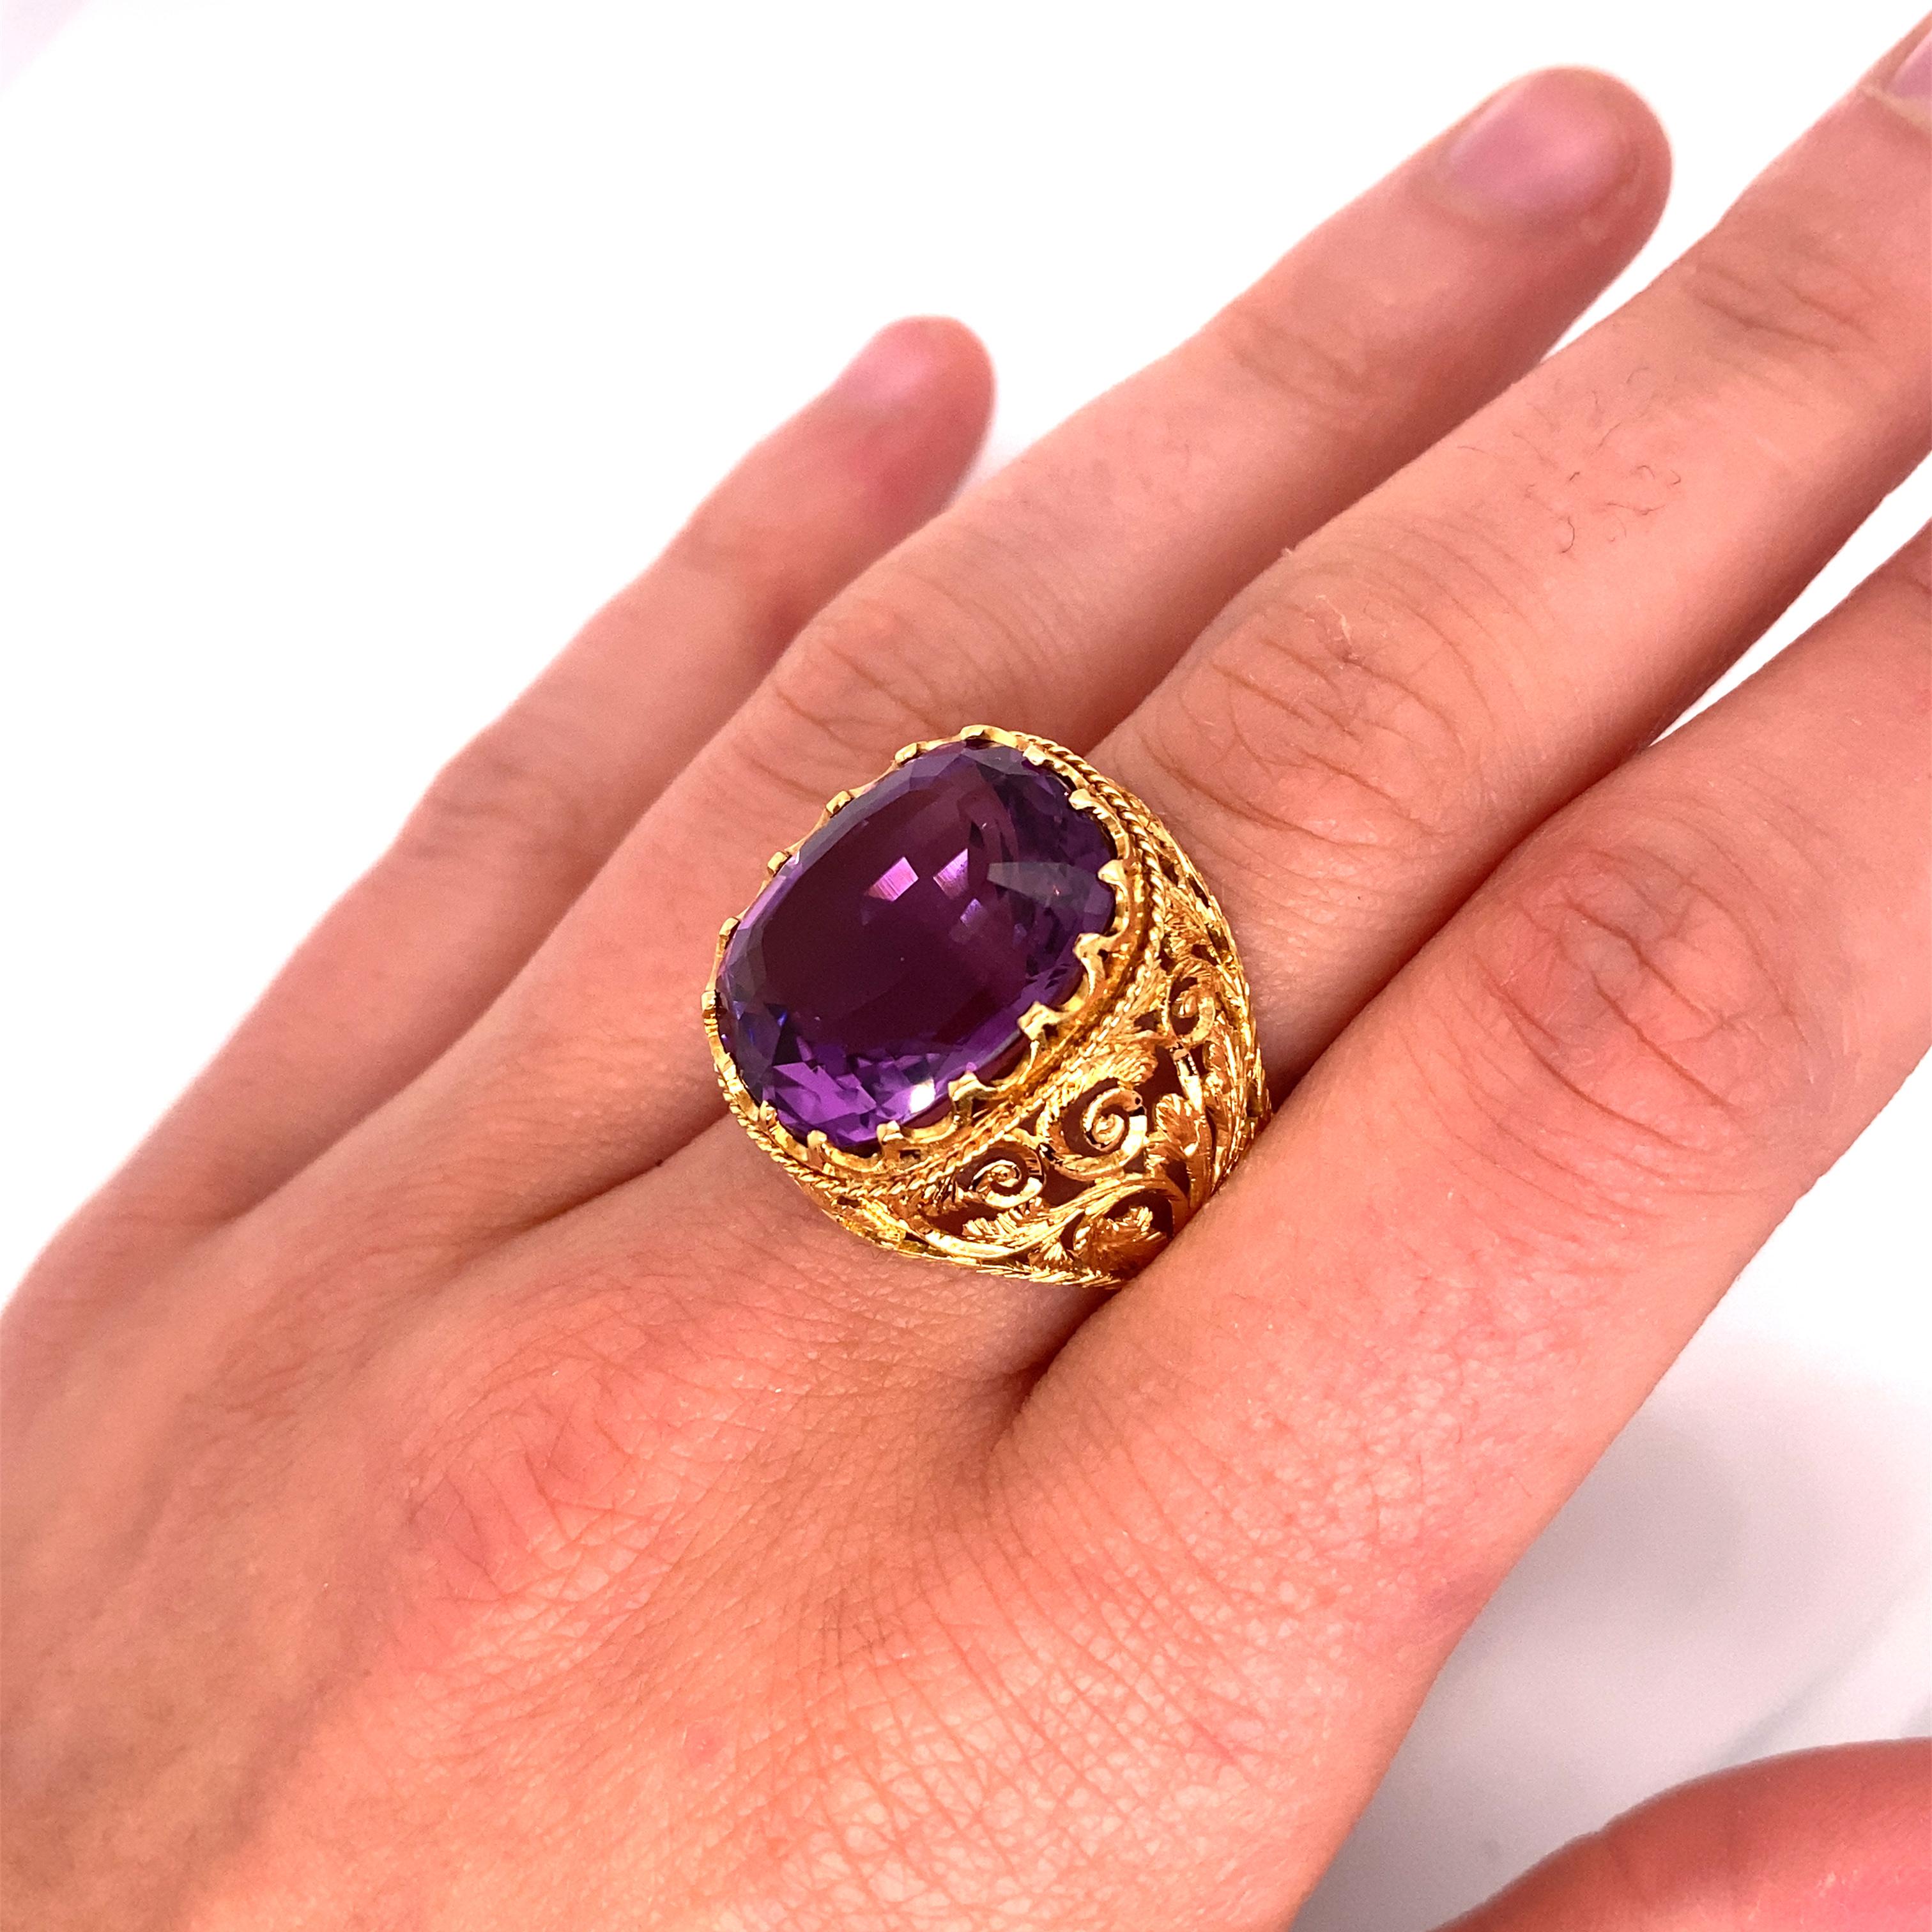 Vintage 1980's 15ct Cushion Cut Amethyst Ring For Sale 7